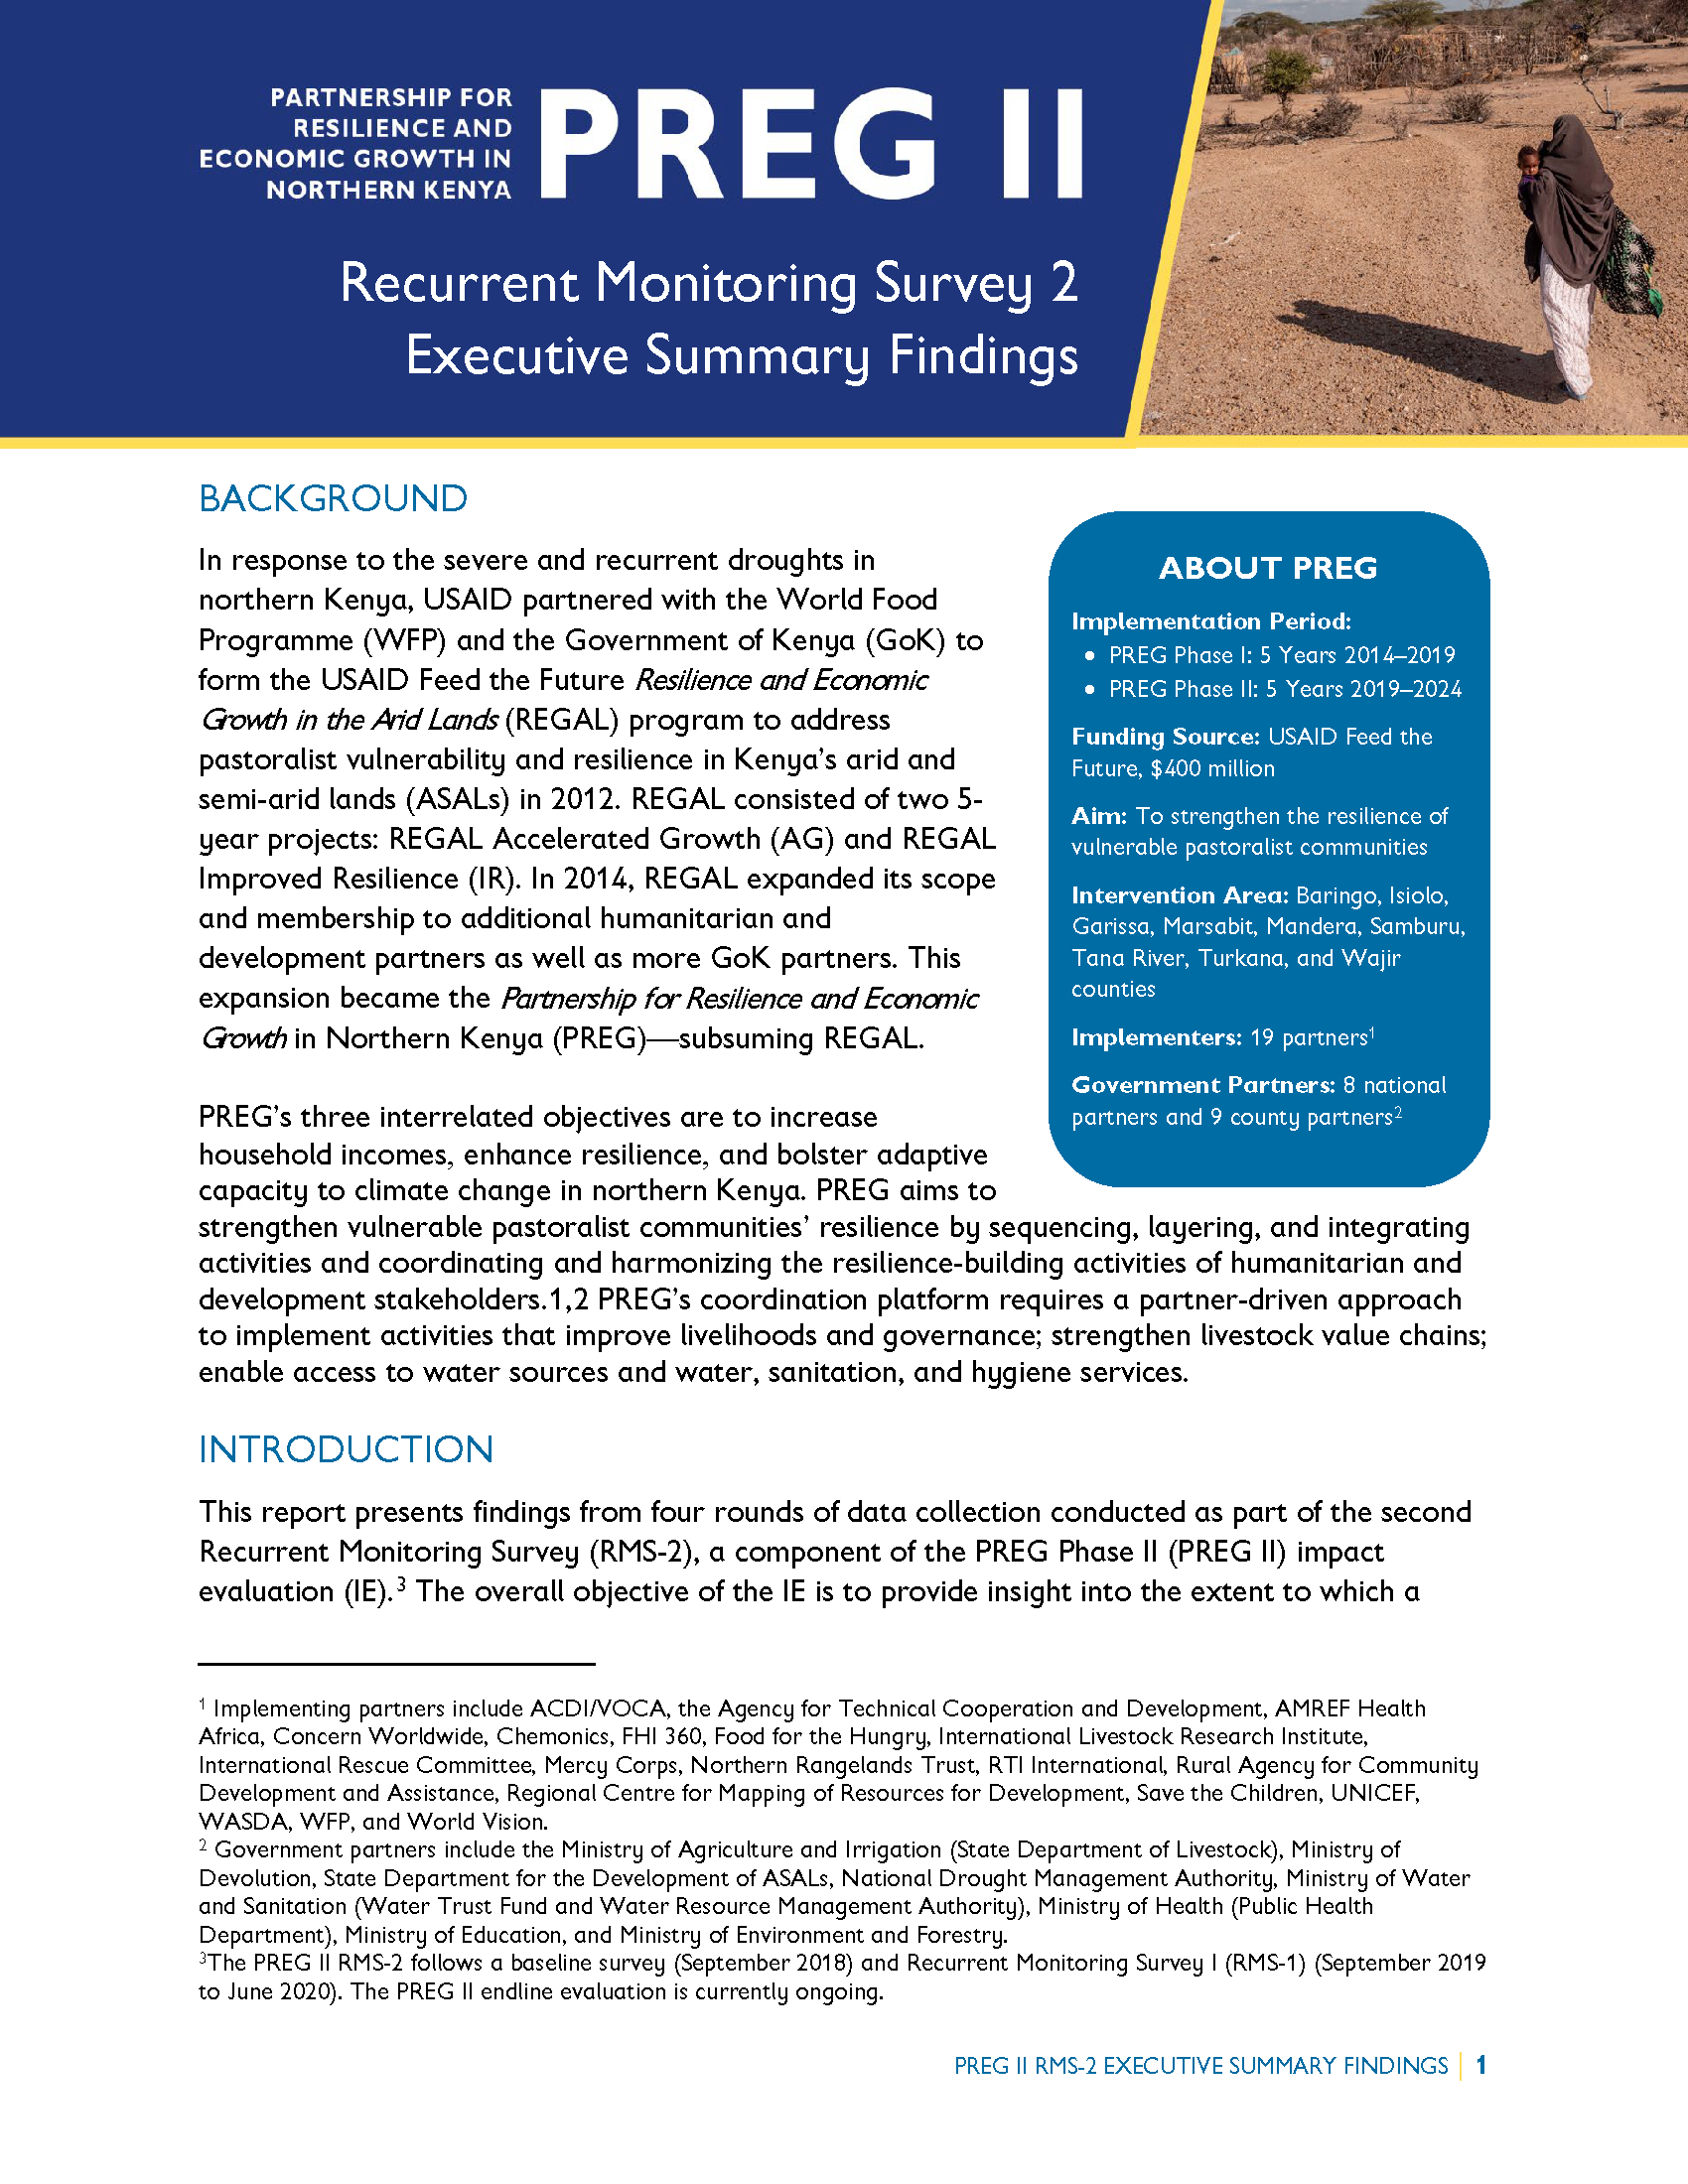 Cover page for PREG II Recurrent Monitoring Survey 2 Executive Summary Findings